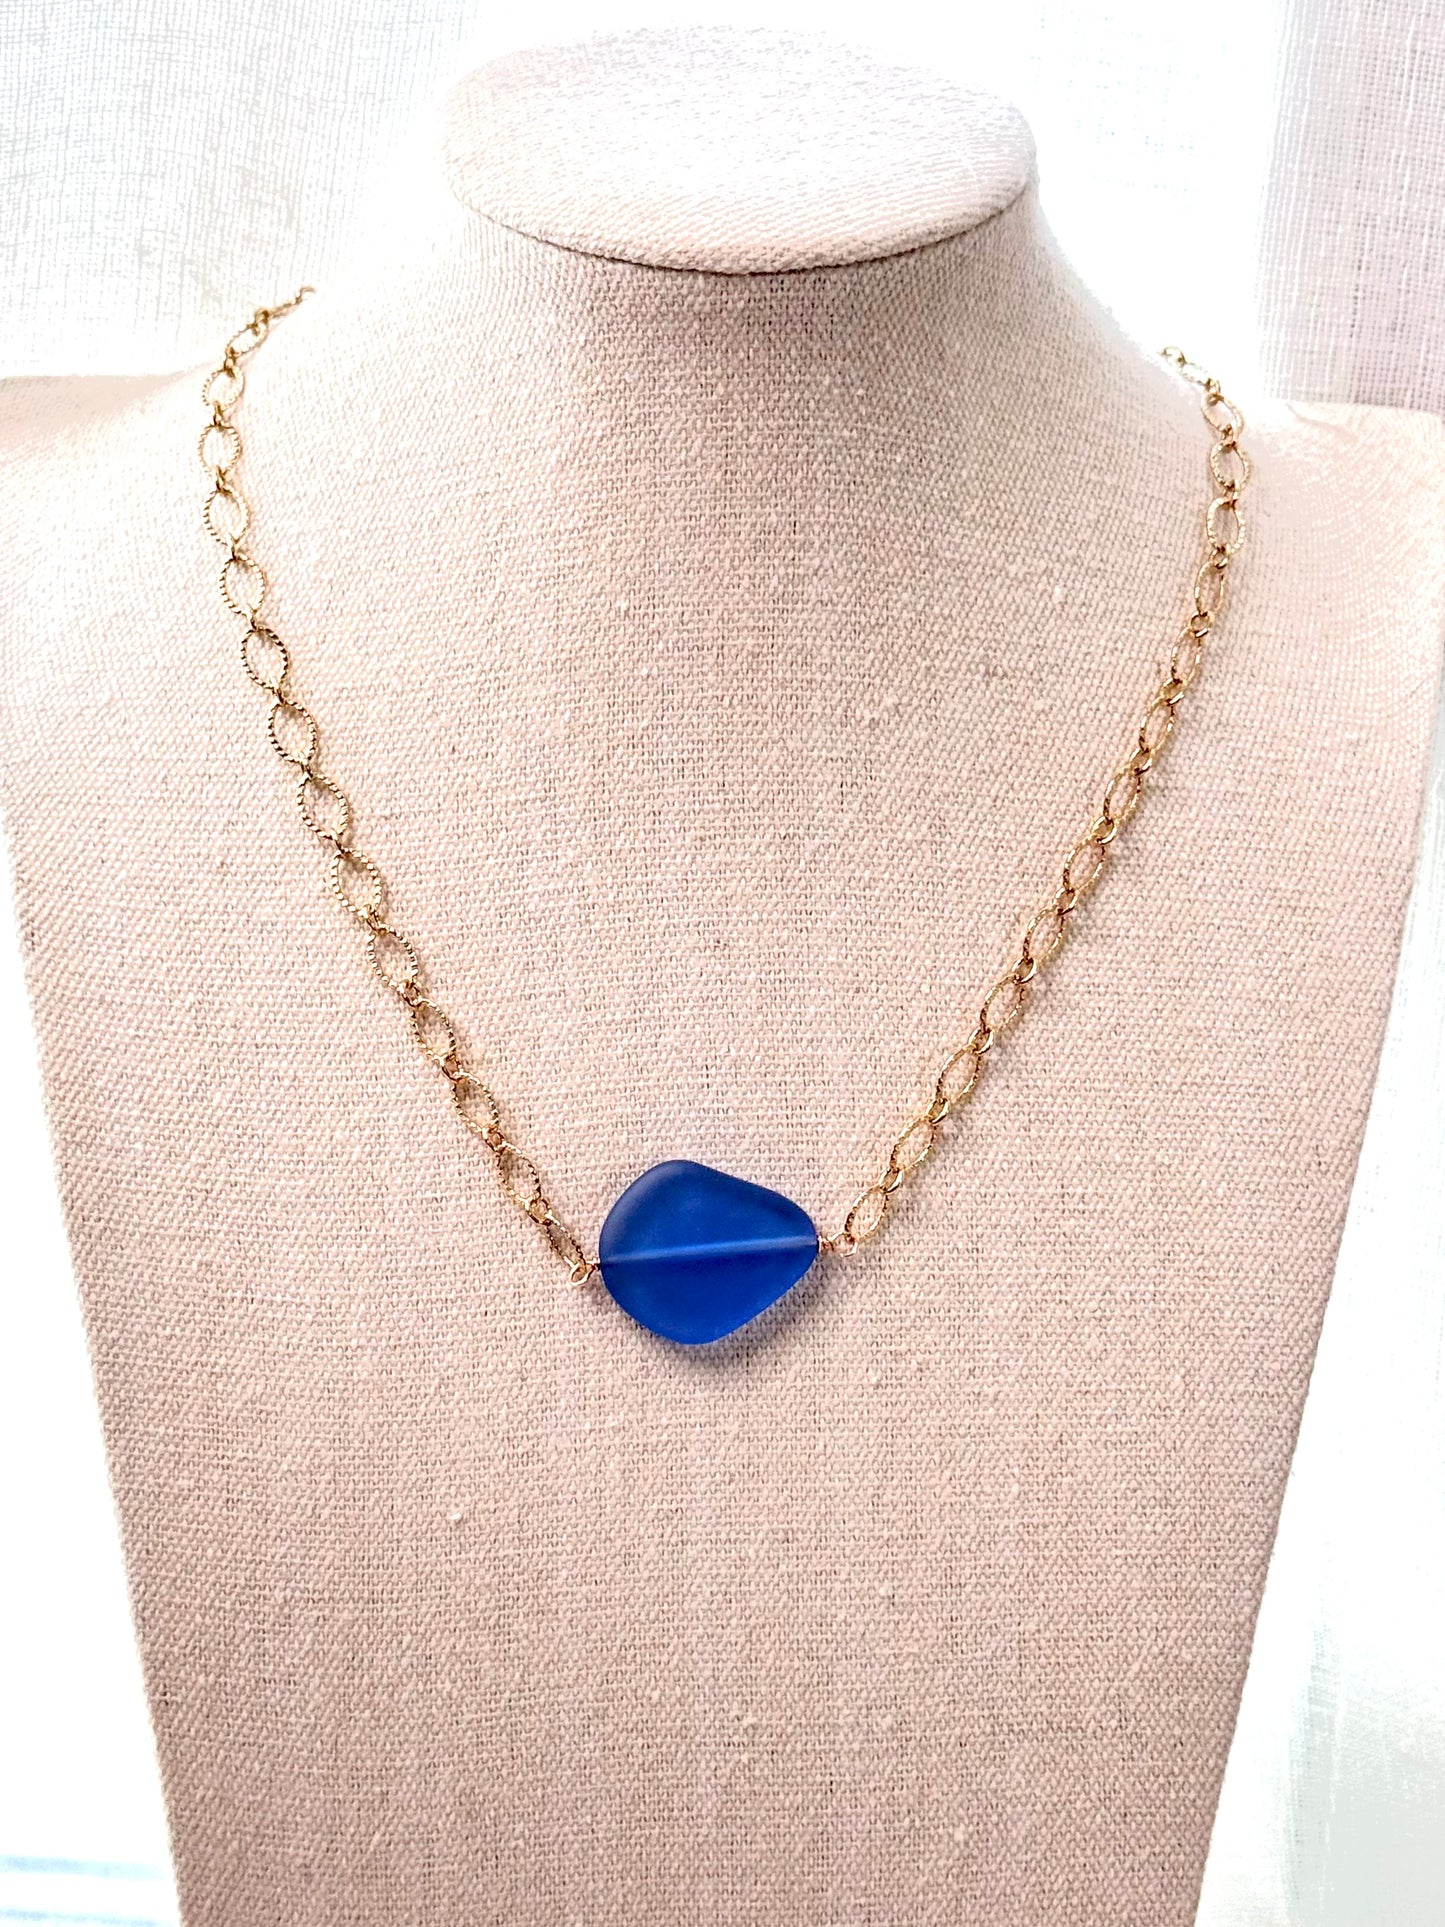 Blue Sea Glass + Gold Necklace